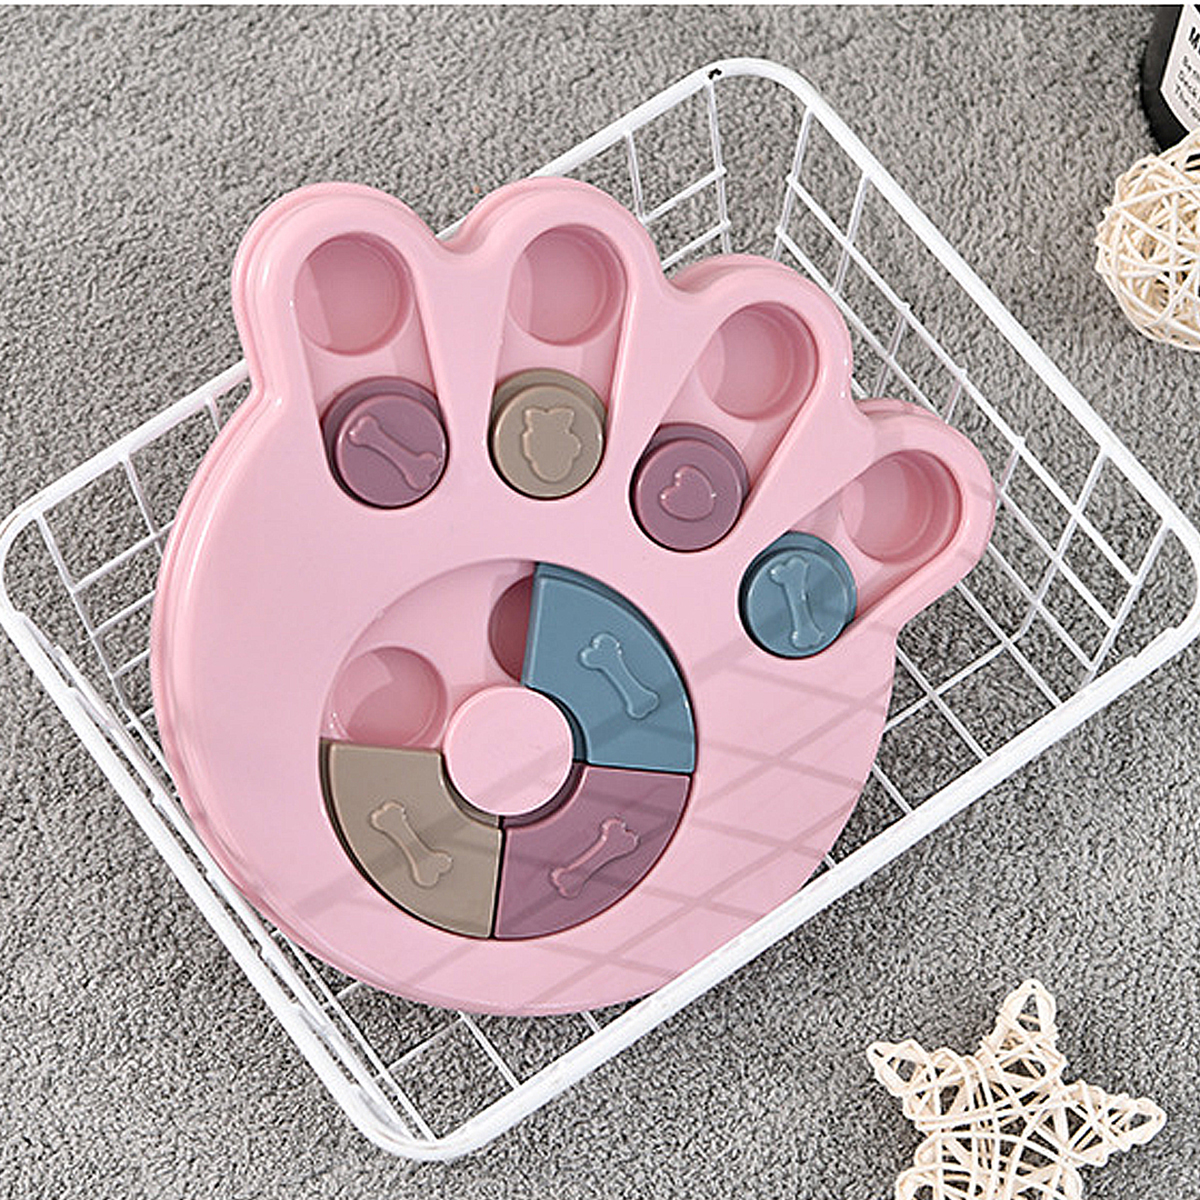 Puppy Treat Dispenser Dog Toys Dog Food Puzzle Toys Bowl Puppy Feeder Pet Products Supplies Accessories Pet Foraging Tray